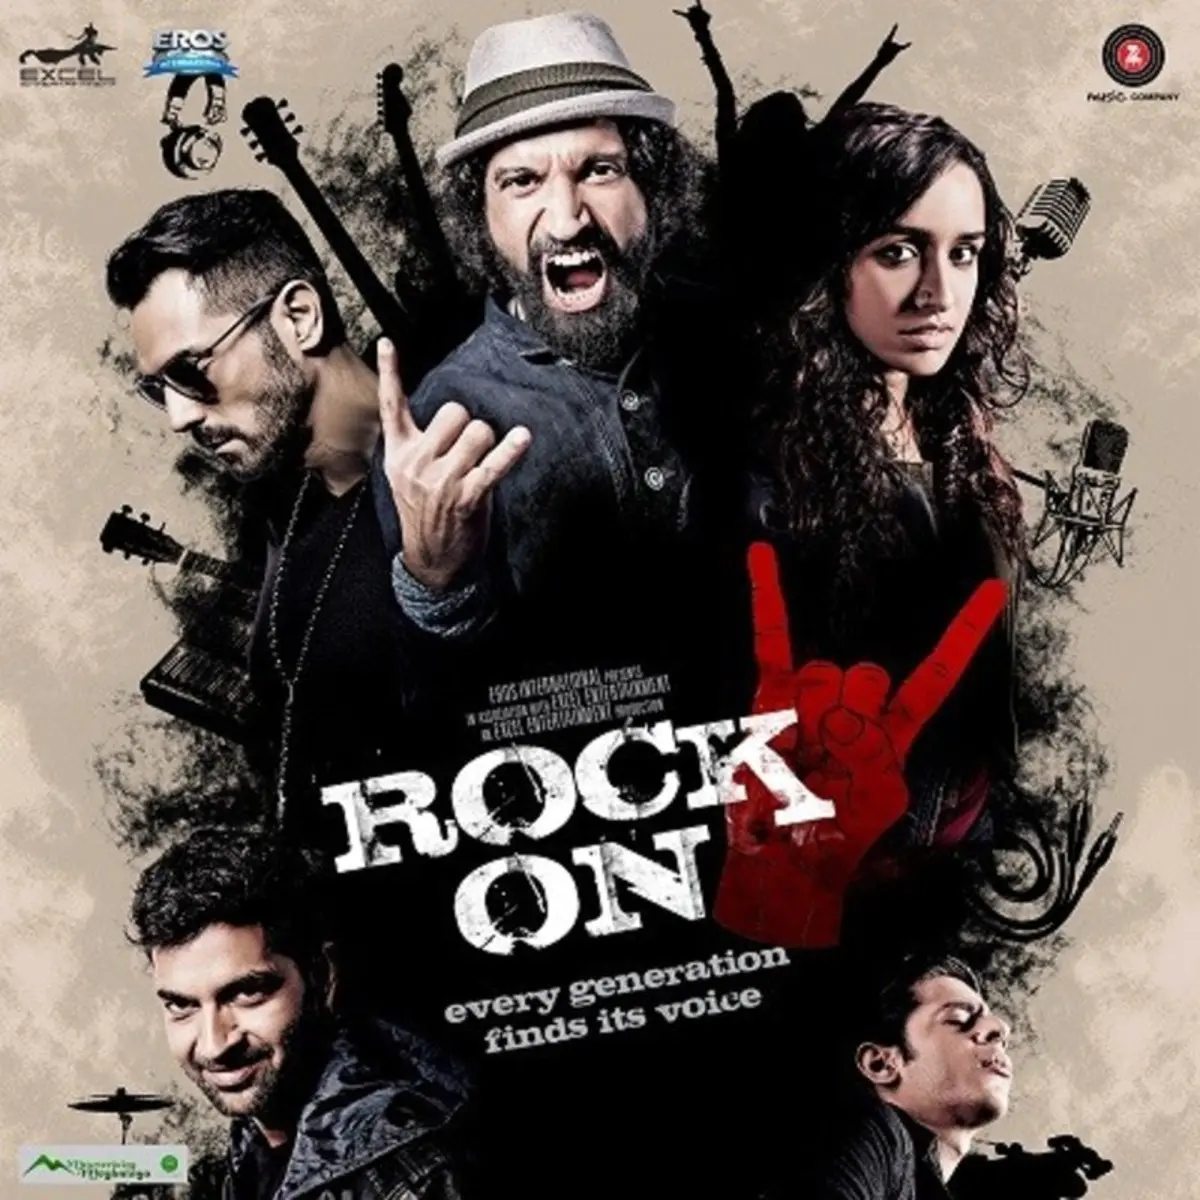 You Know What I Mean Lyrics In Hindi Rock On 2 You Know What I Mean Song Lyrics In English Free Online On Gaana Com